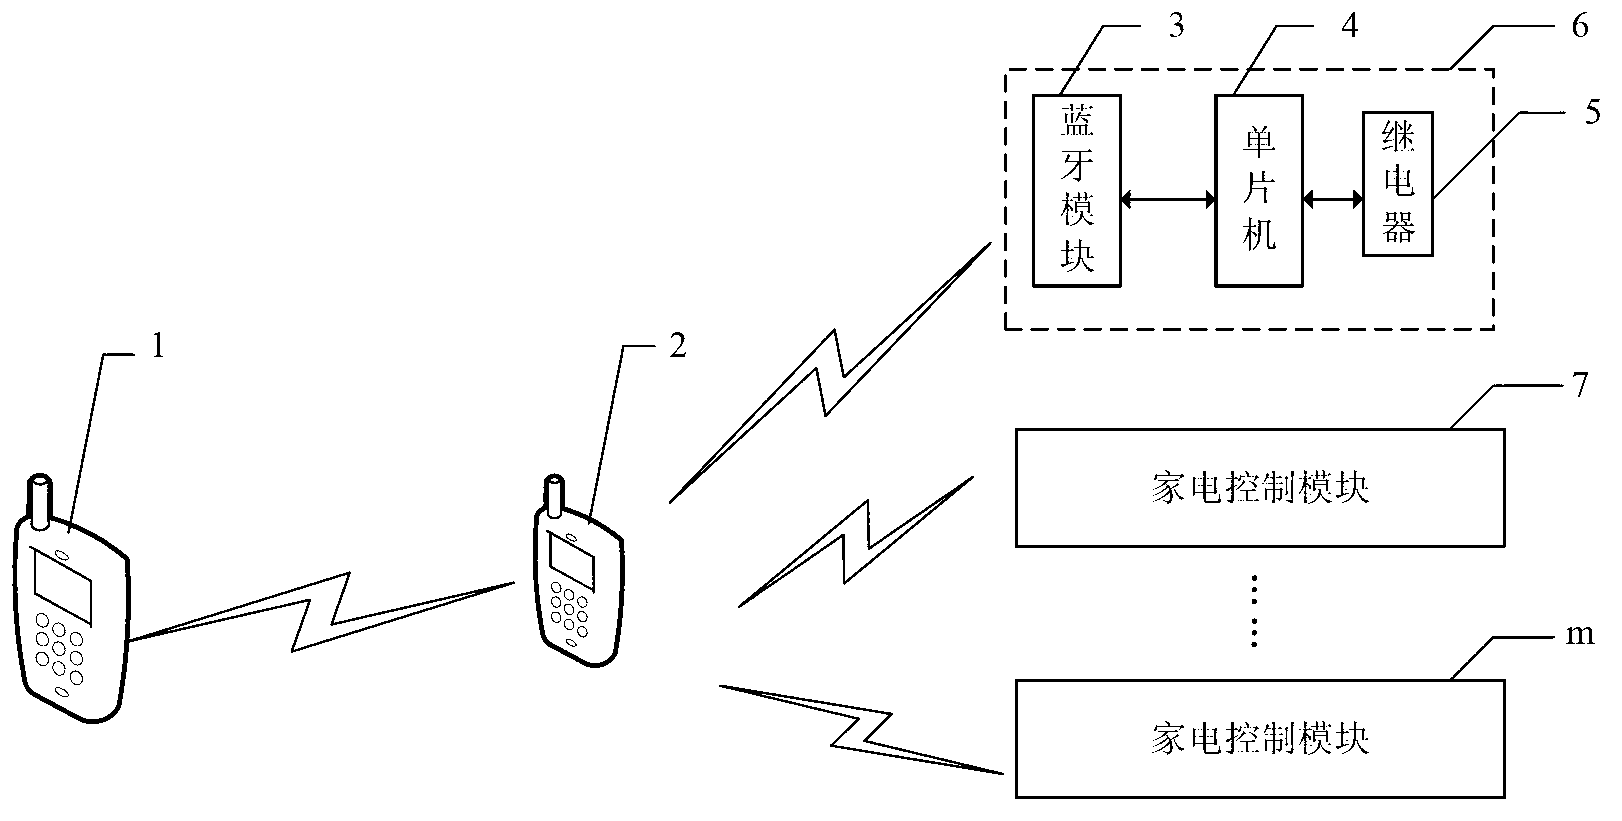 Remote control device based on Android mobile phones and control method thereof